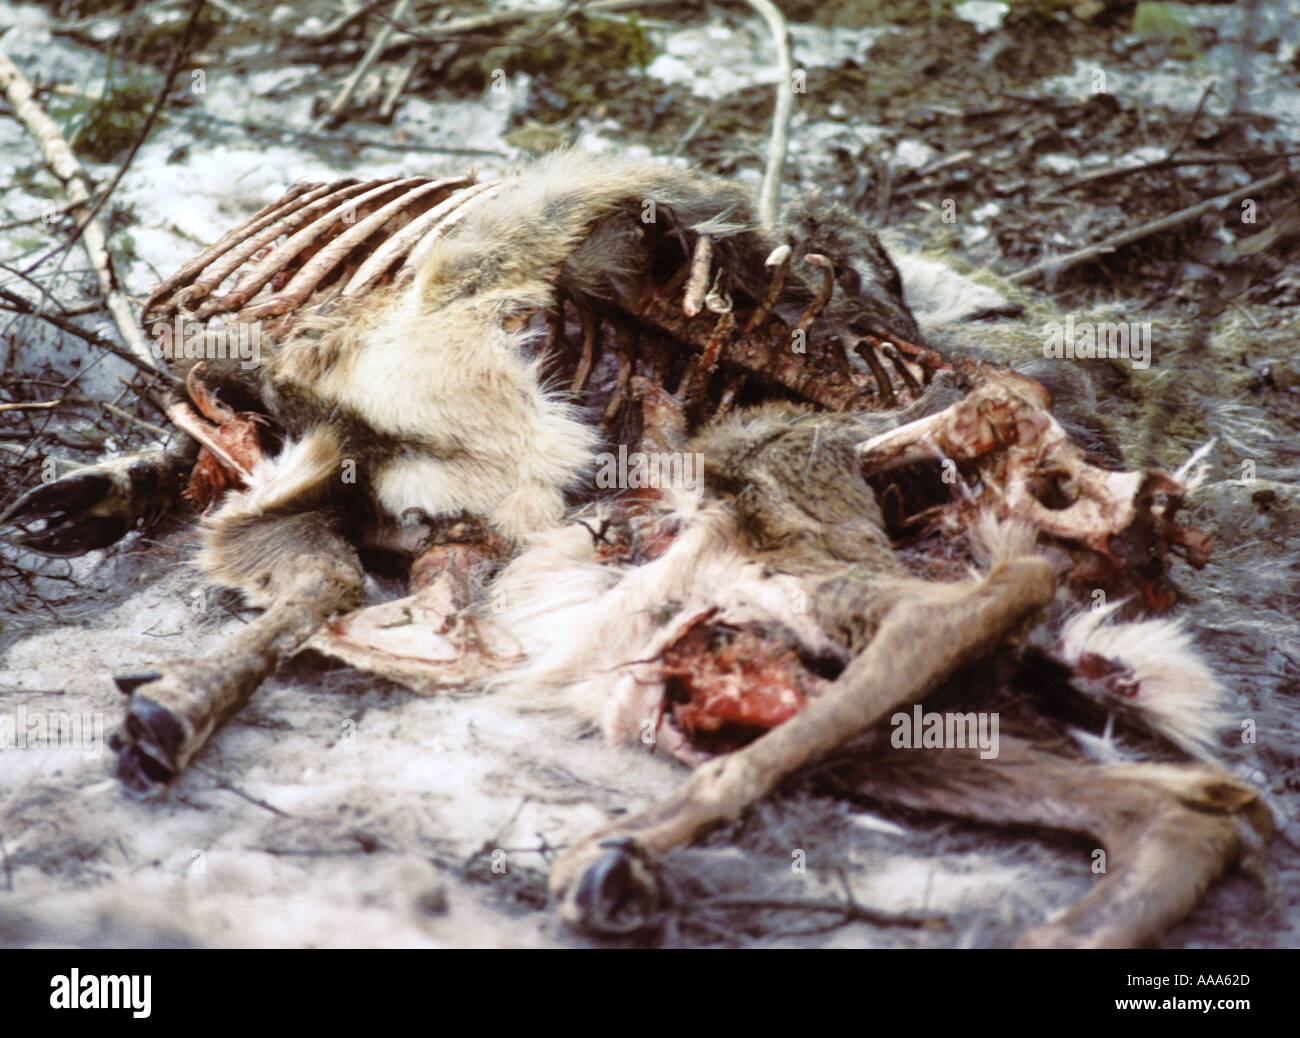 deer after being eaten by coyotes Stock Photo